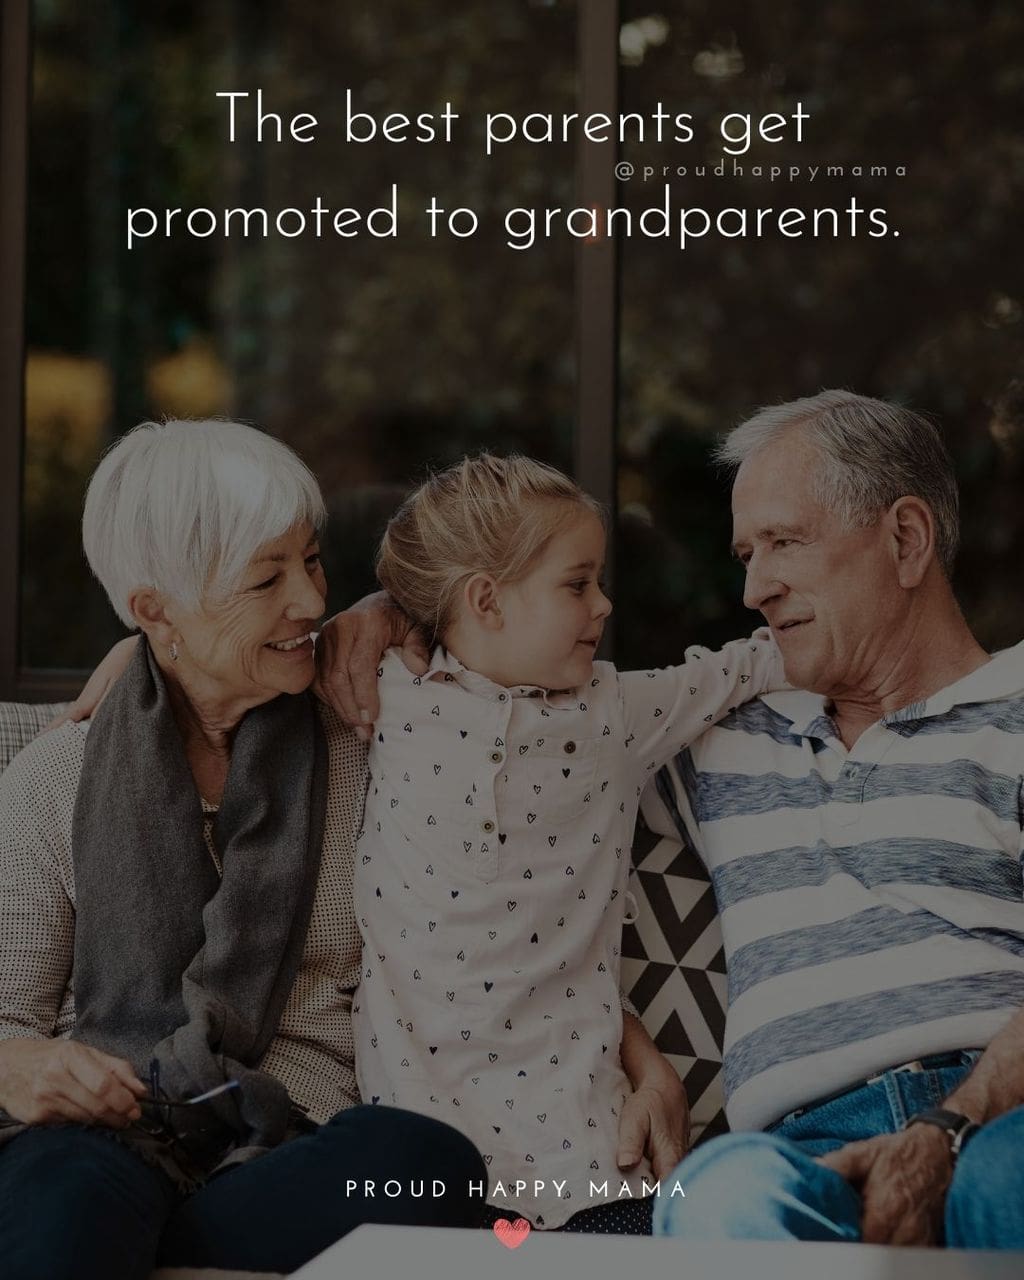 Quotes for Grandchildren - The best parents get promoted to grandparents.